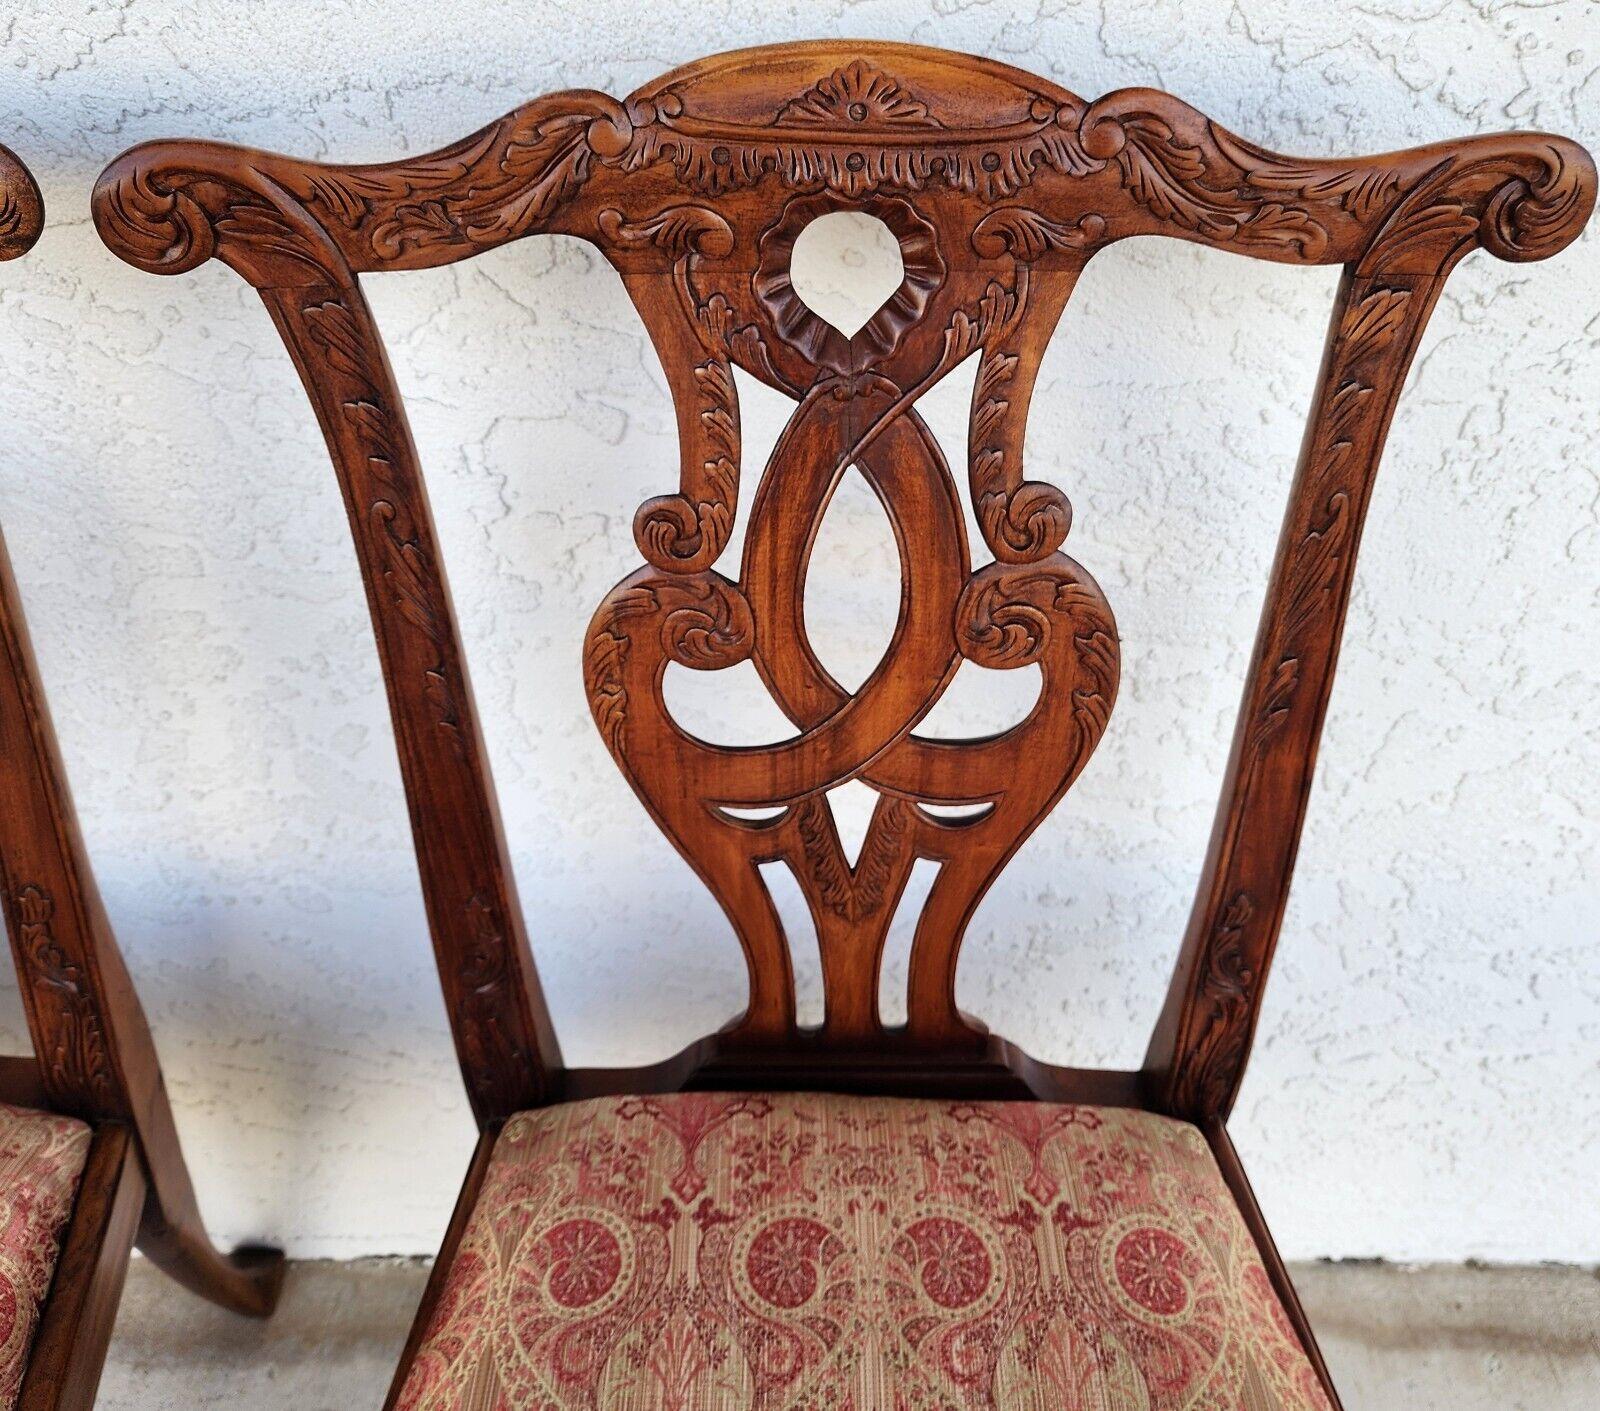 Antique Chippendale Dining Chairs Owl Mahogany - Set of 4 For Sale 3